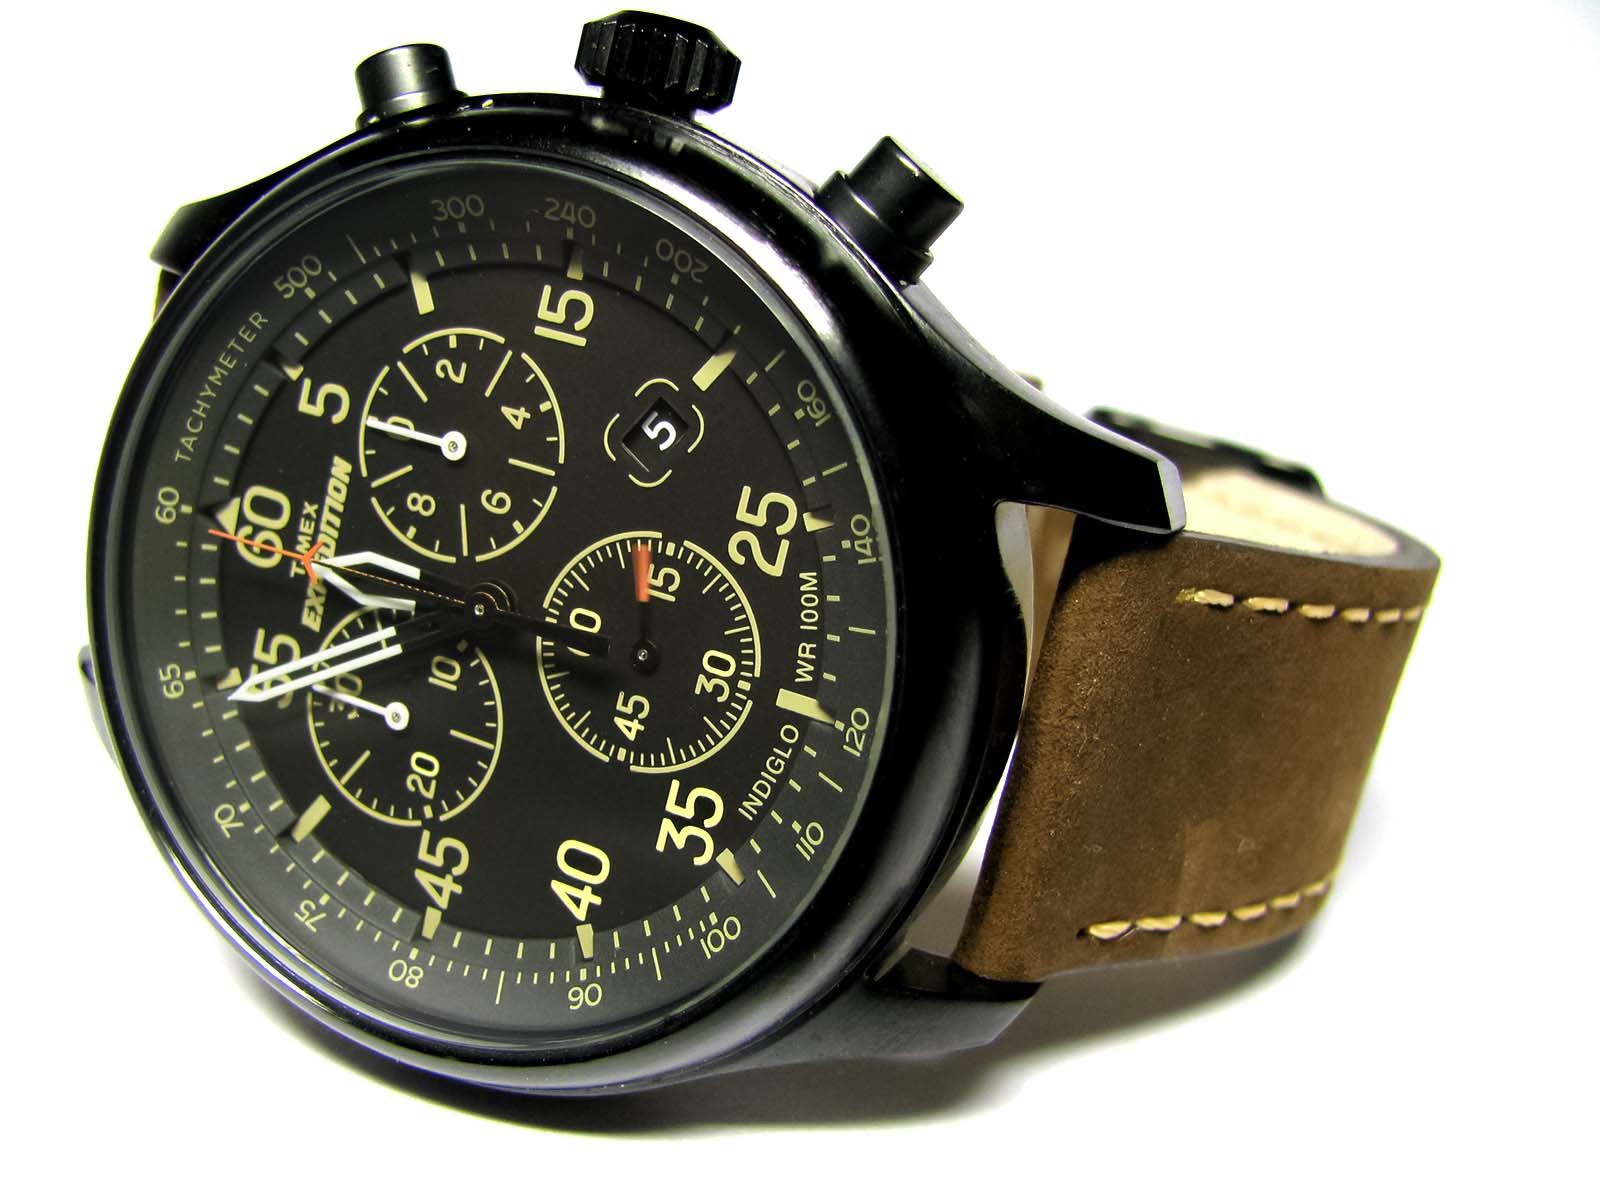 Timex Expedition Chronograph Watch Manual